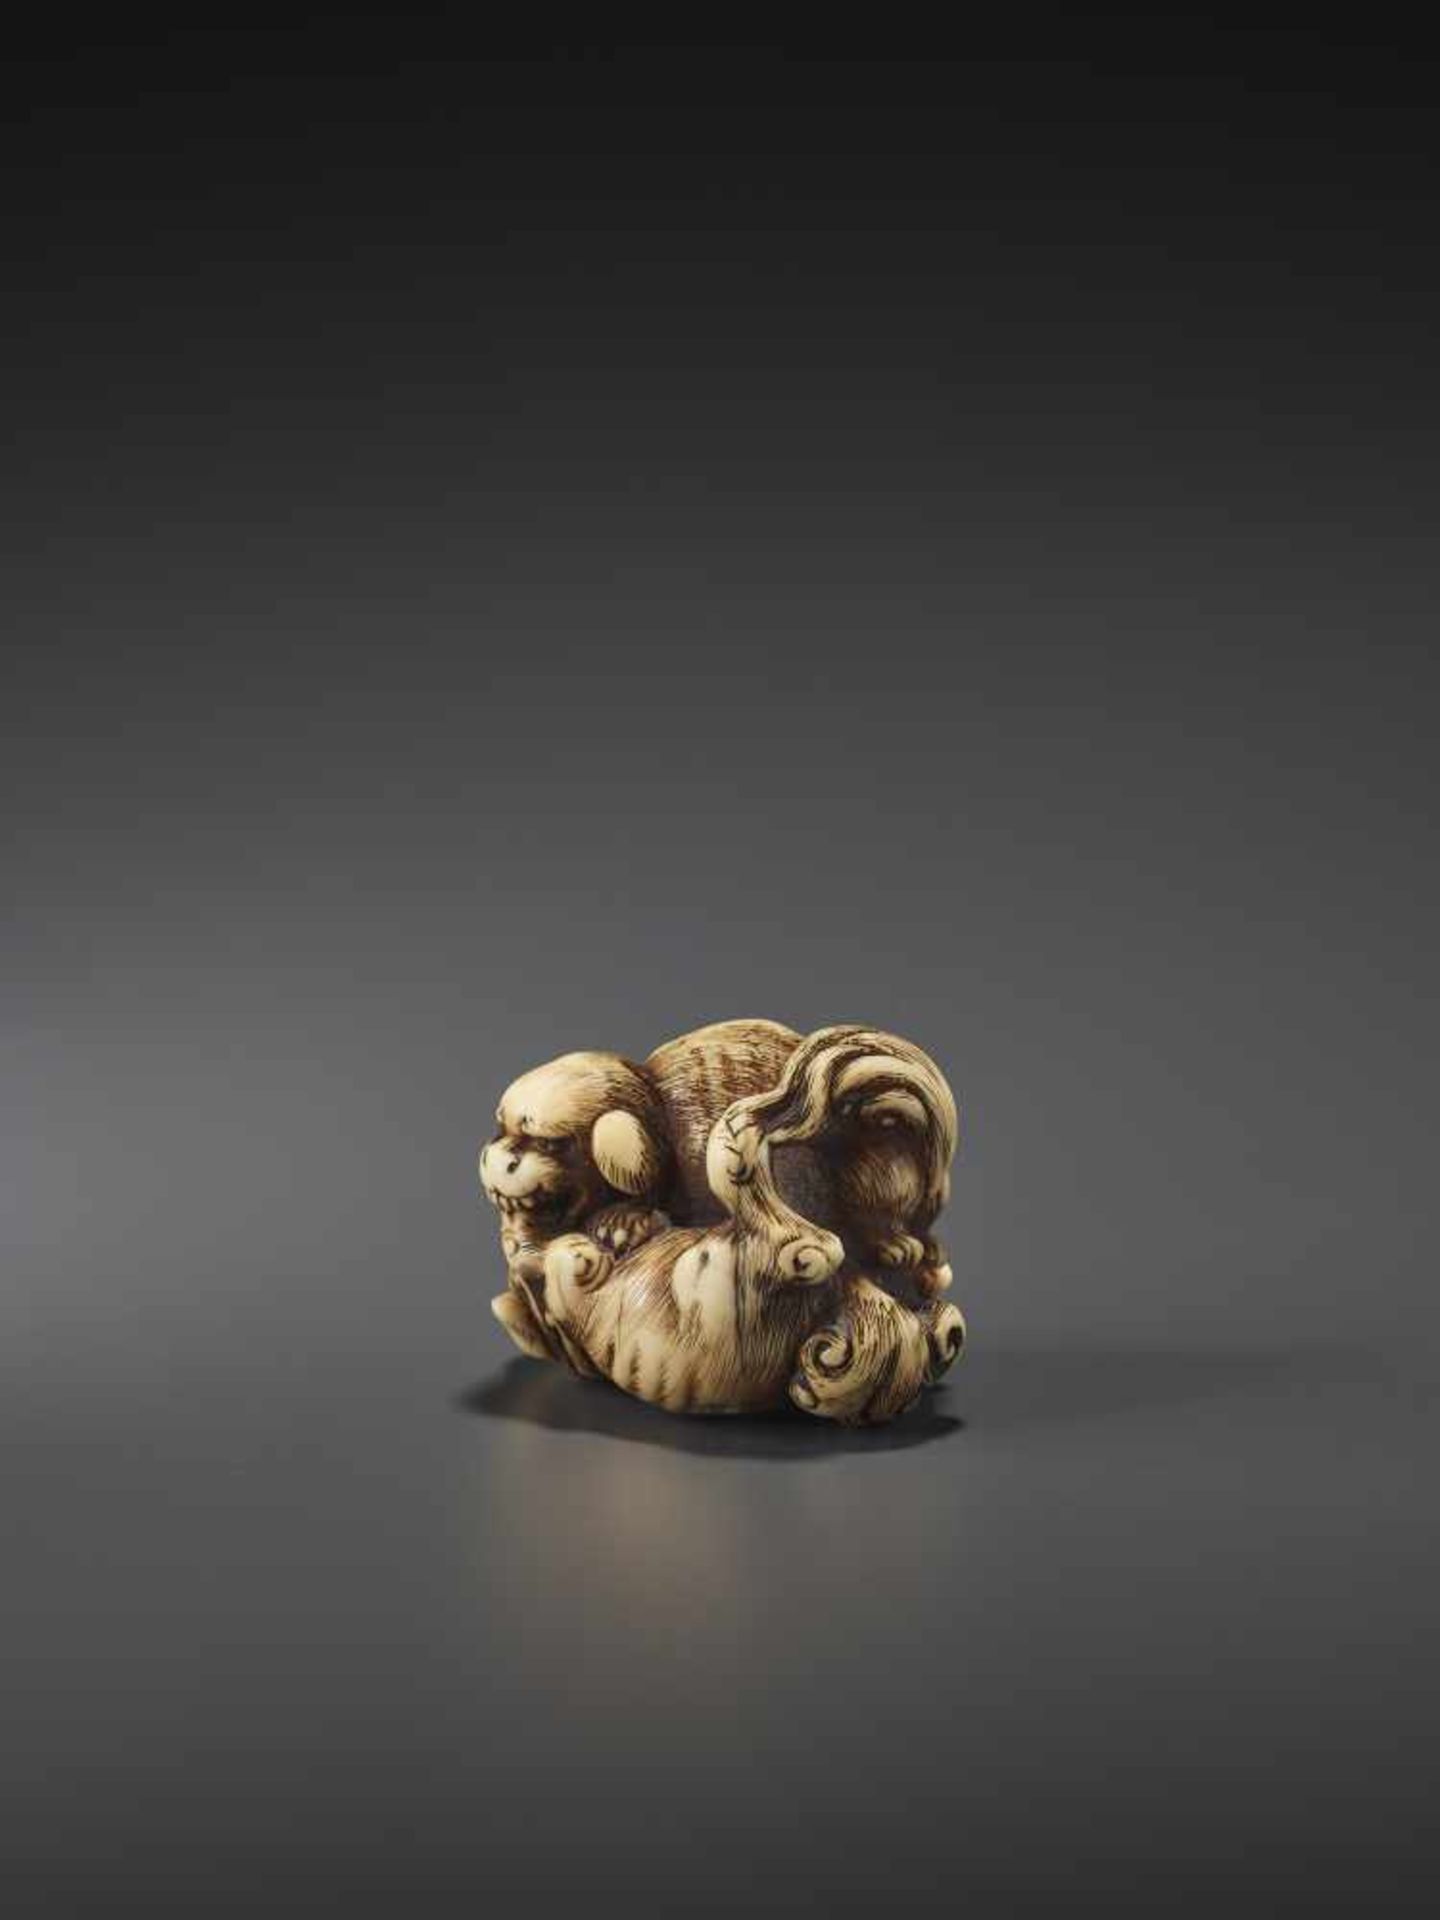 A FINE IVORY NETSUKE OF TWO FIGHTING SHISHI BY KINSHI By Kinshi, ivory netsukeJapan, 19th century, - Image 4 of 10